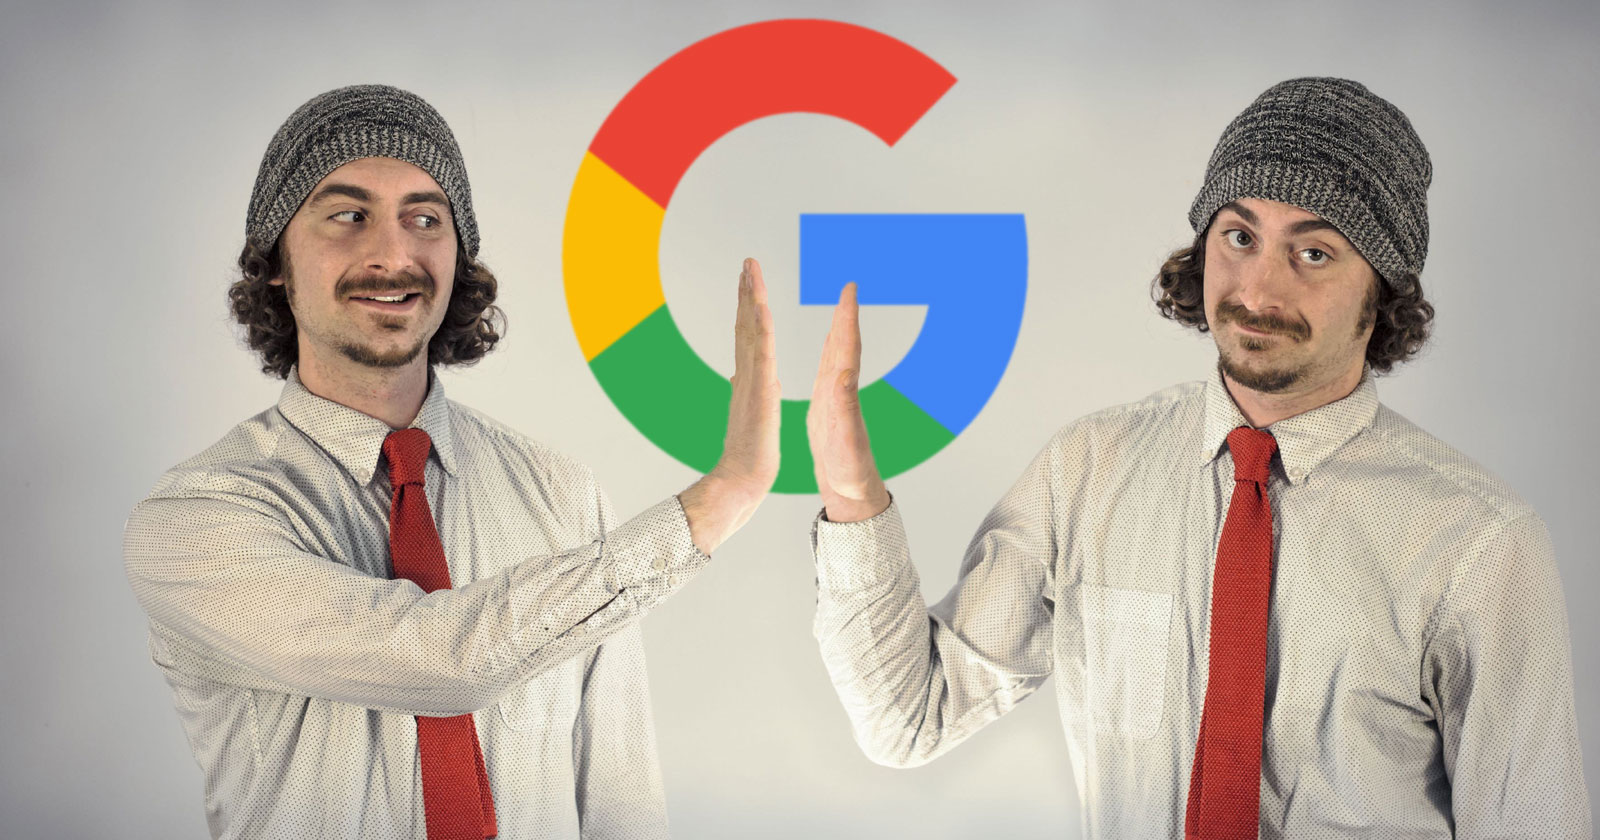 Image of a pair of twins and Google's logo